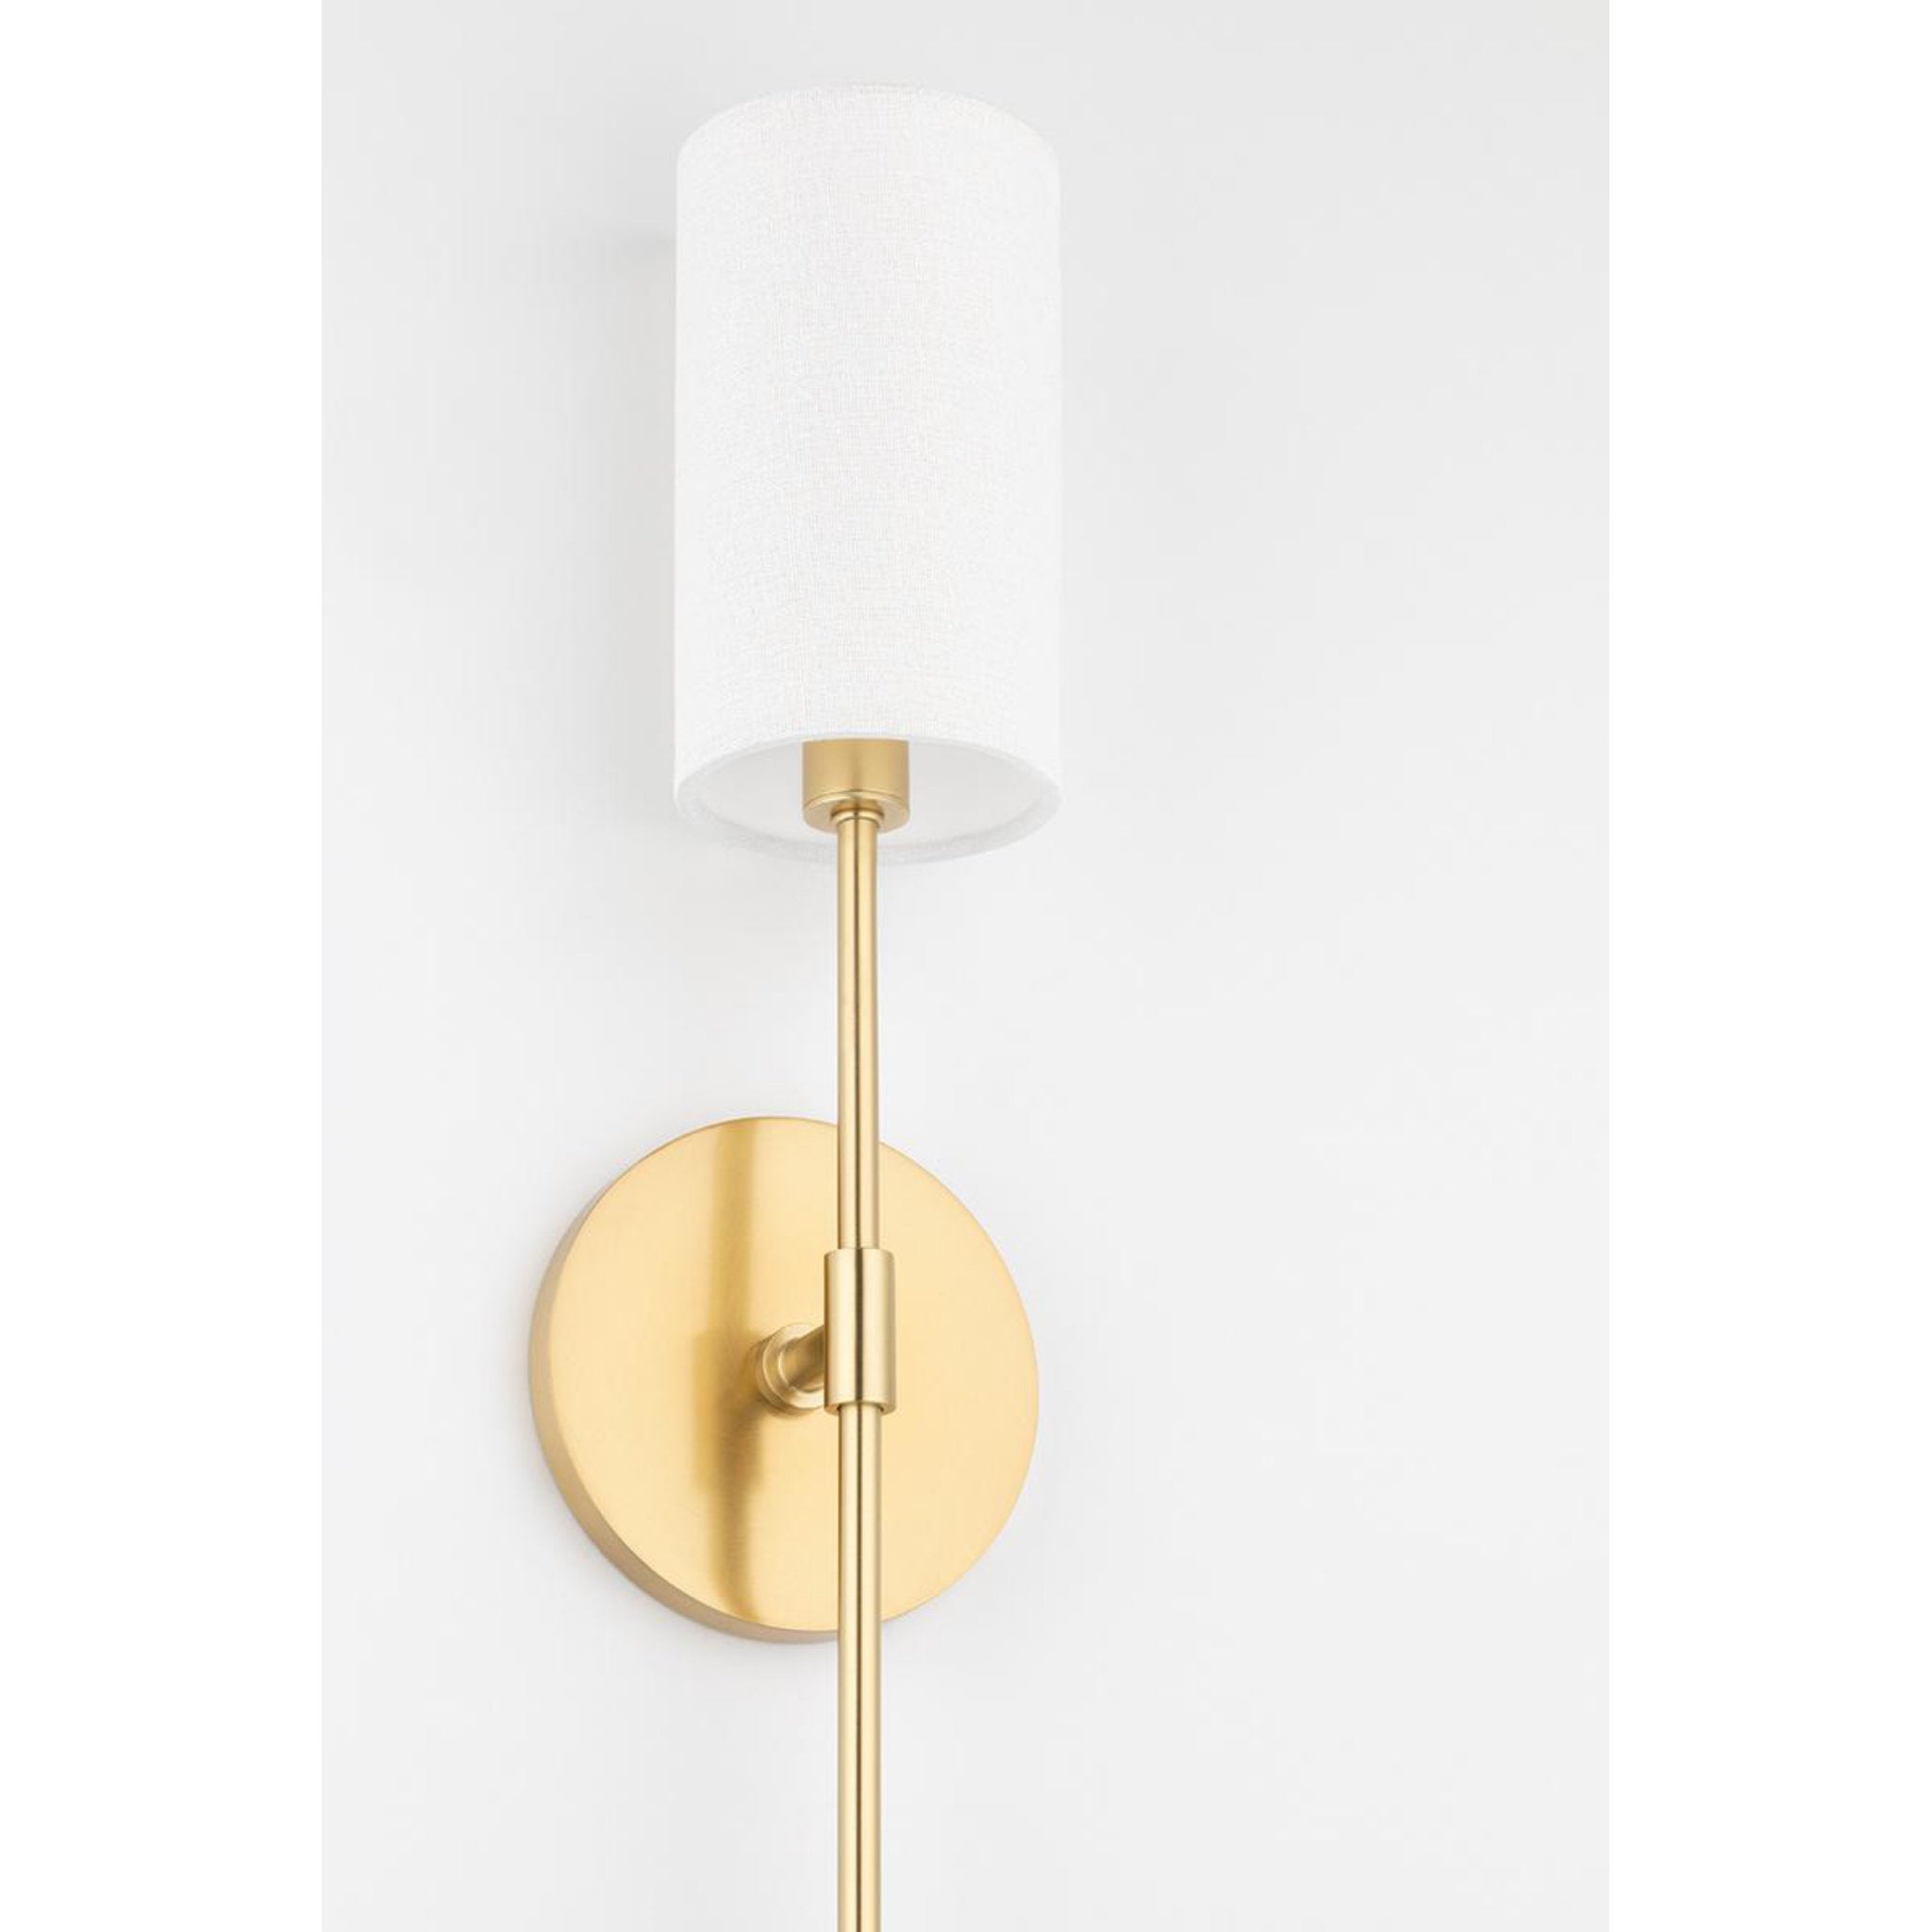 Olivia 1-Light Wall Sconce in Old Bronze